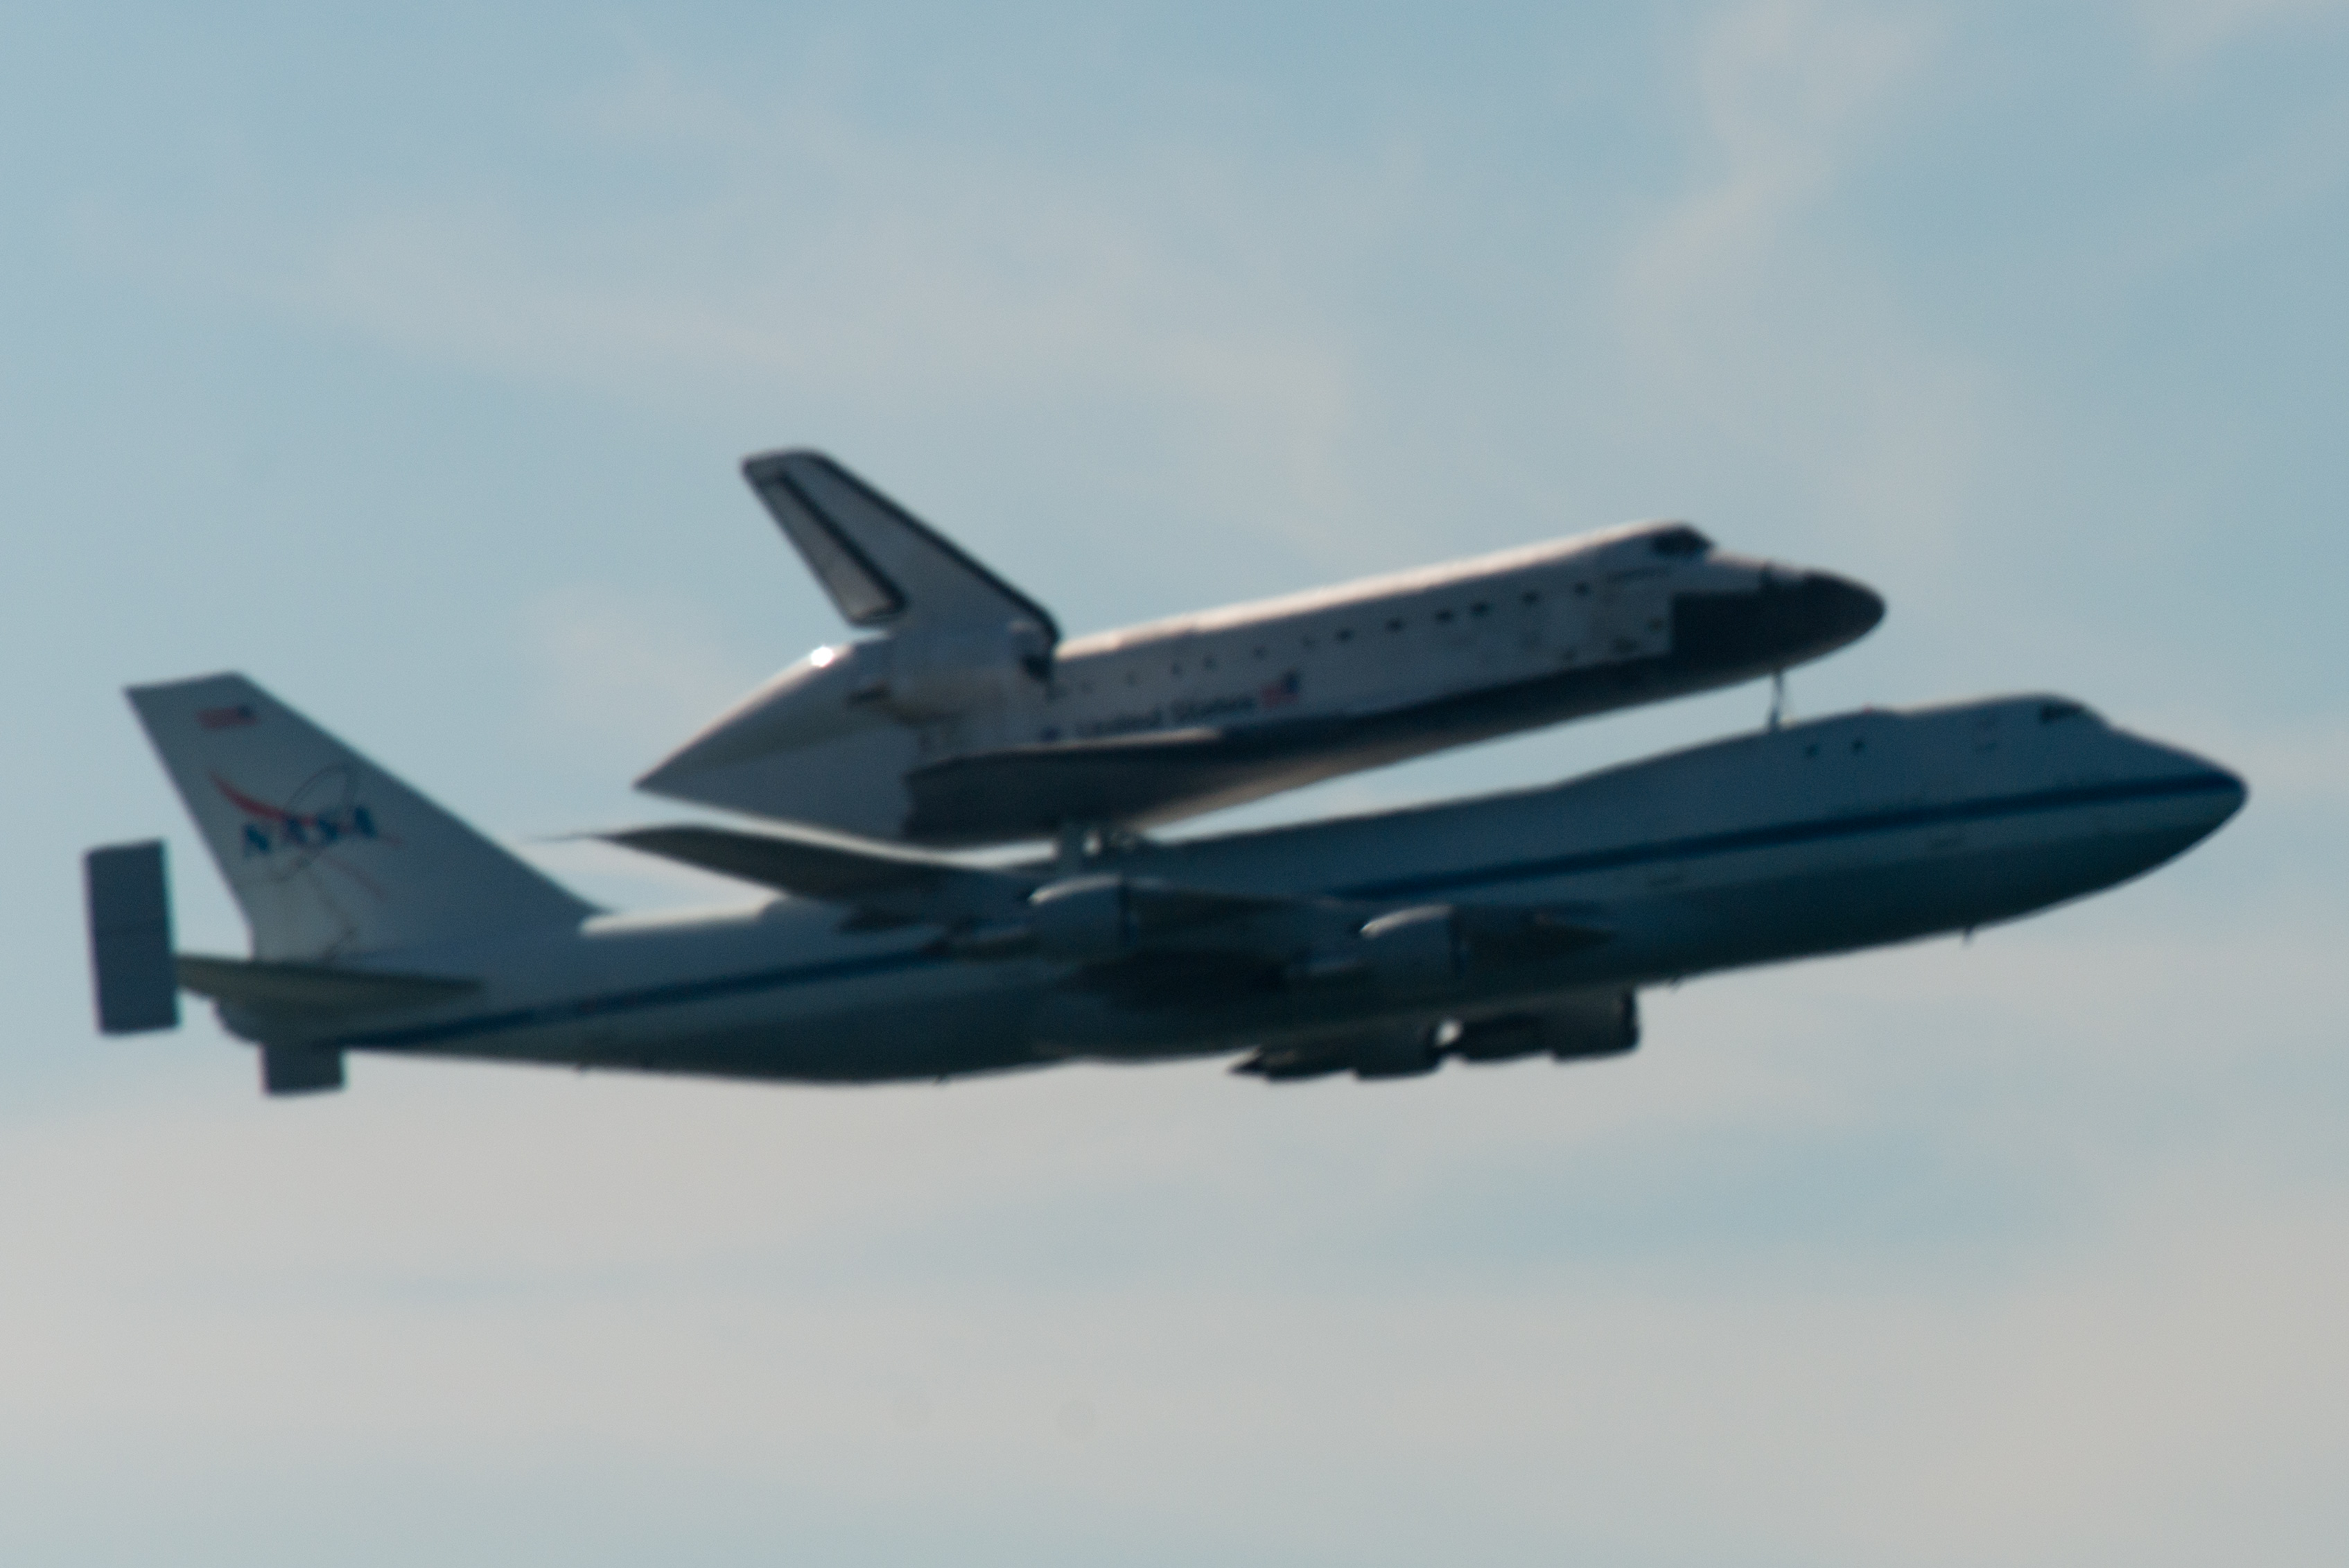 Space shuttle endeavour and carrier plane flying over san francisco bay - profile view photo